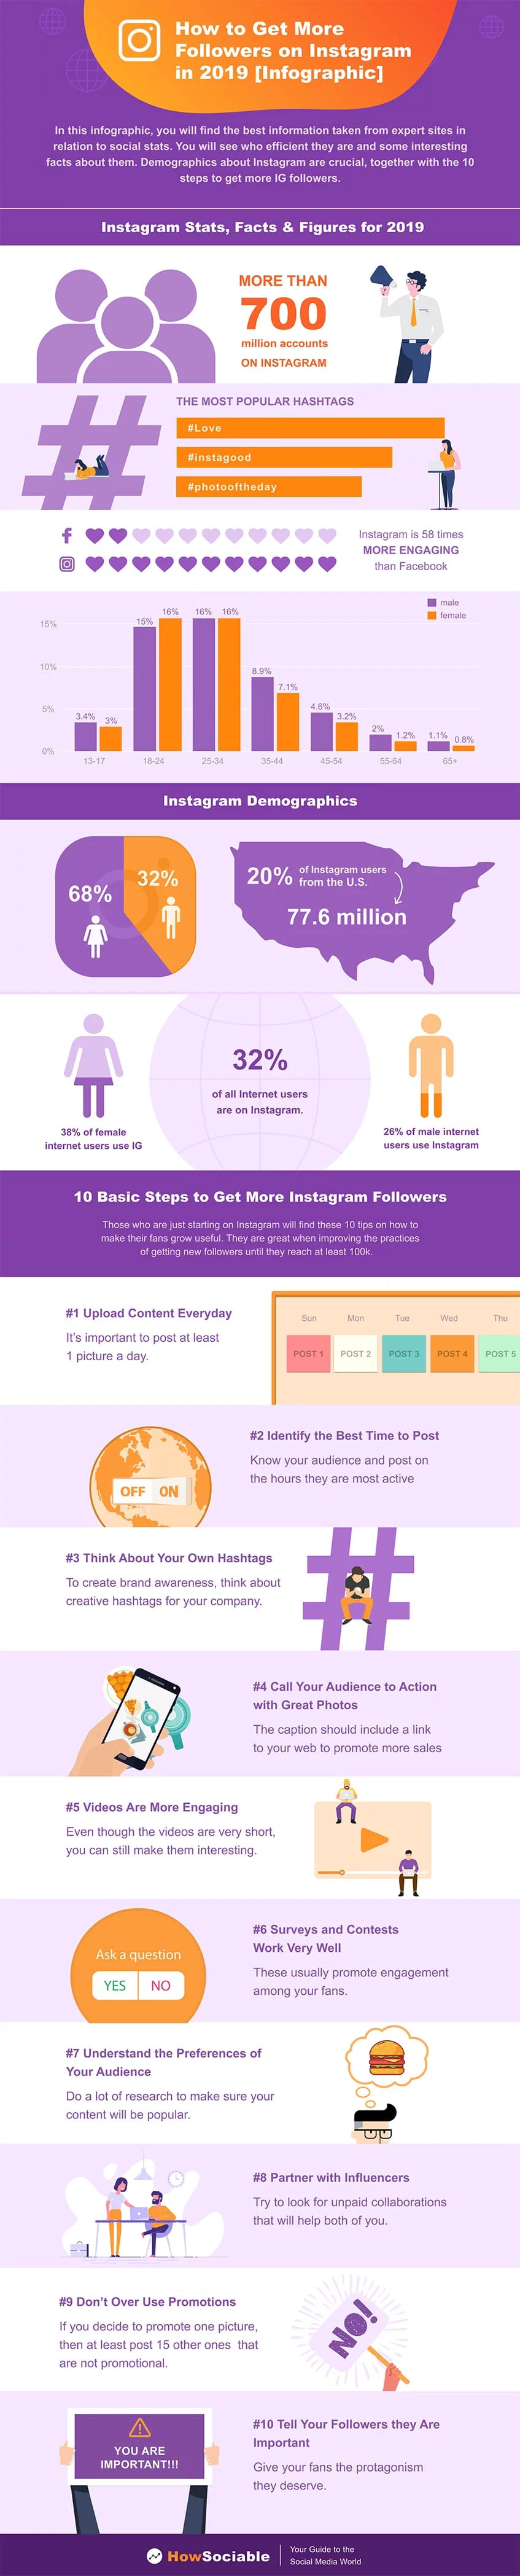 How to Get More Followers on Instagram in 2019